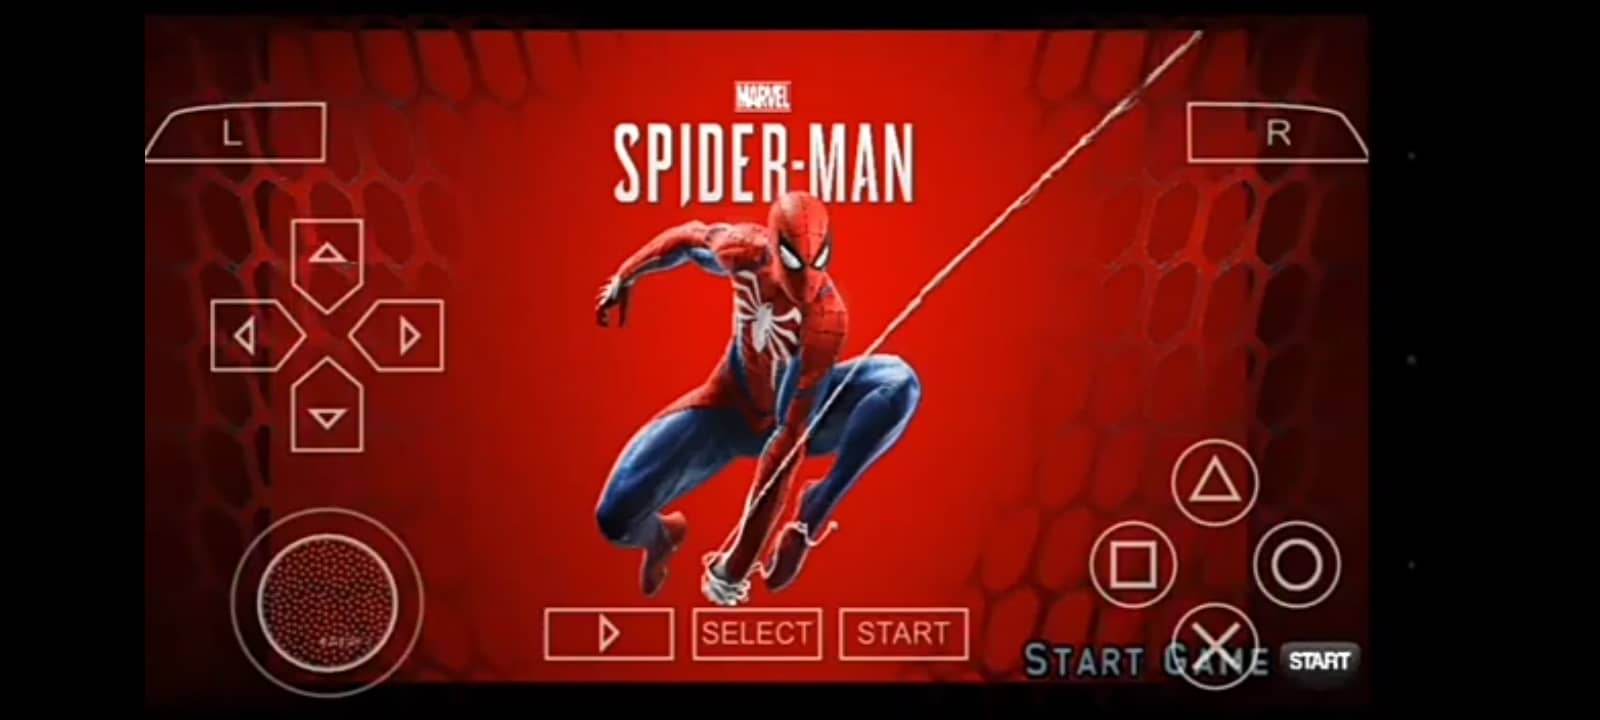 spider man 3 game download for android obb